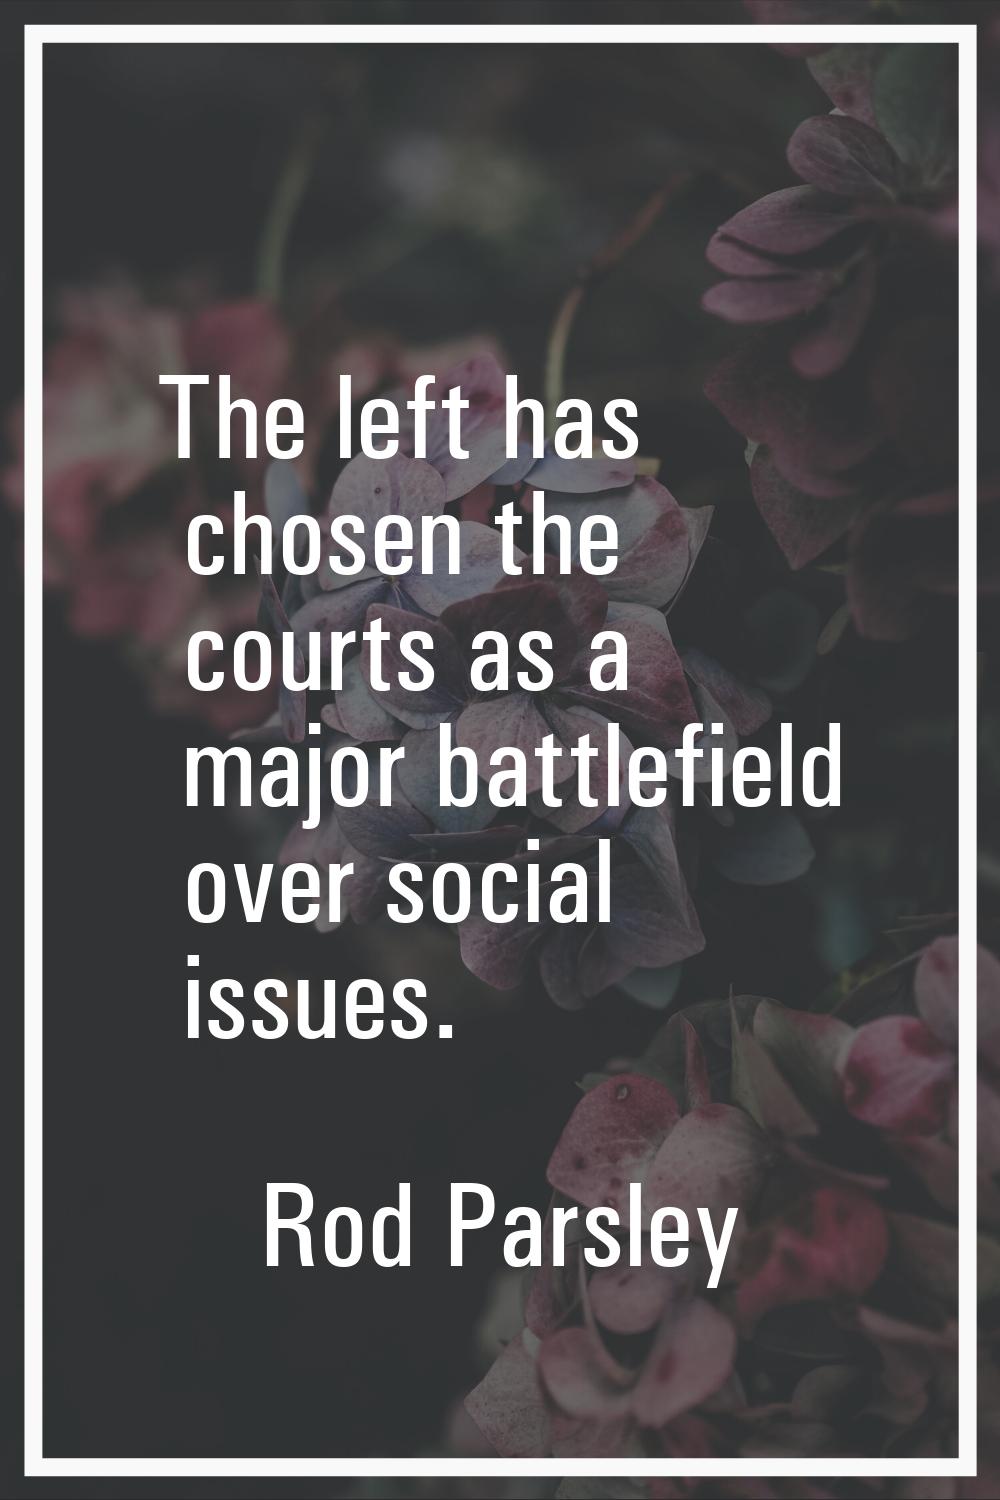 The left has chosen the courts as a major battlefield over social issues.